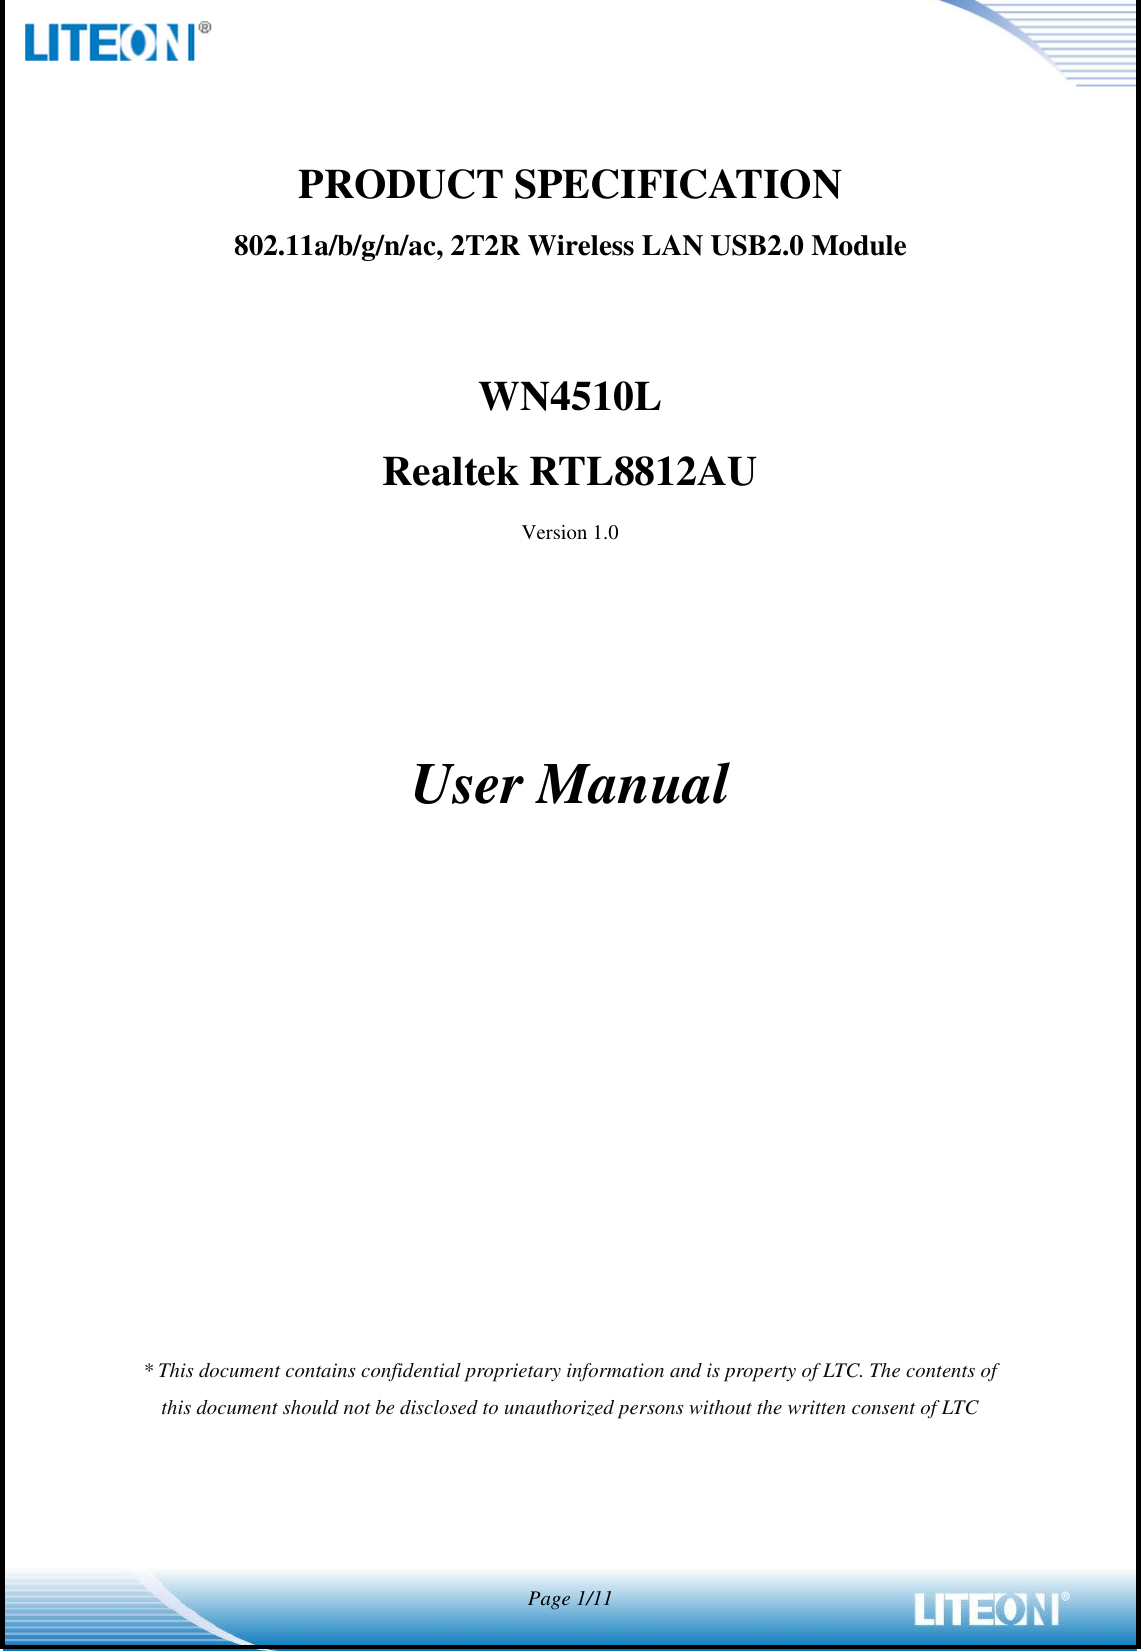  Page 1/11   PRODUCT SPECIFICATION 802.11a/b/g/n/ac, 2T2R Wireless LAN USB2.0 Module     WN4510L Realtek RTL8812AU Version 1.0      User Manual               * This document contains confidential proprietary information and is property of LTC. The contents of this document should not be disclosed to unauthorized persons without the written consent of LTC  